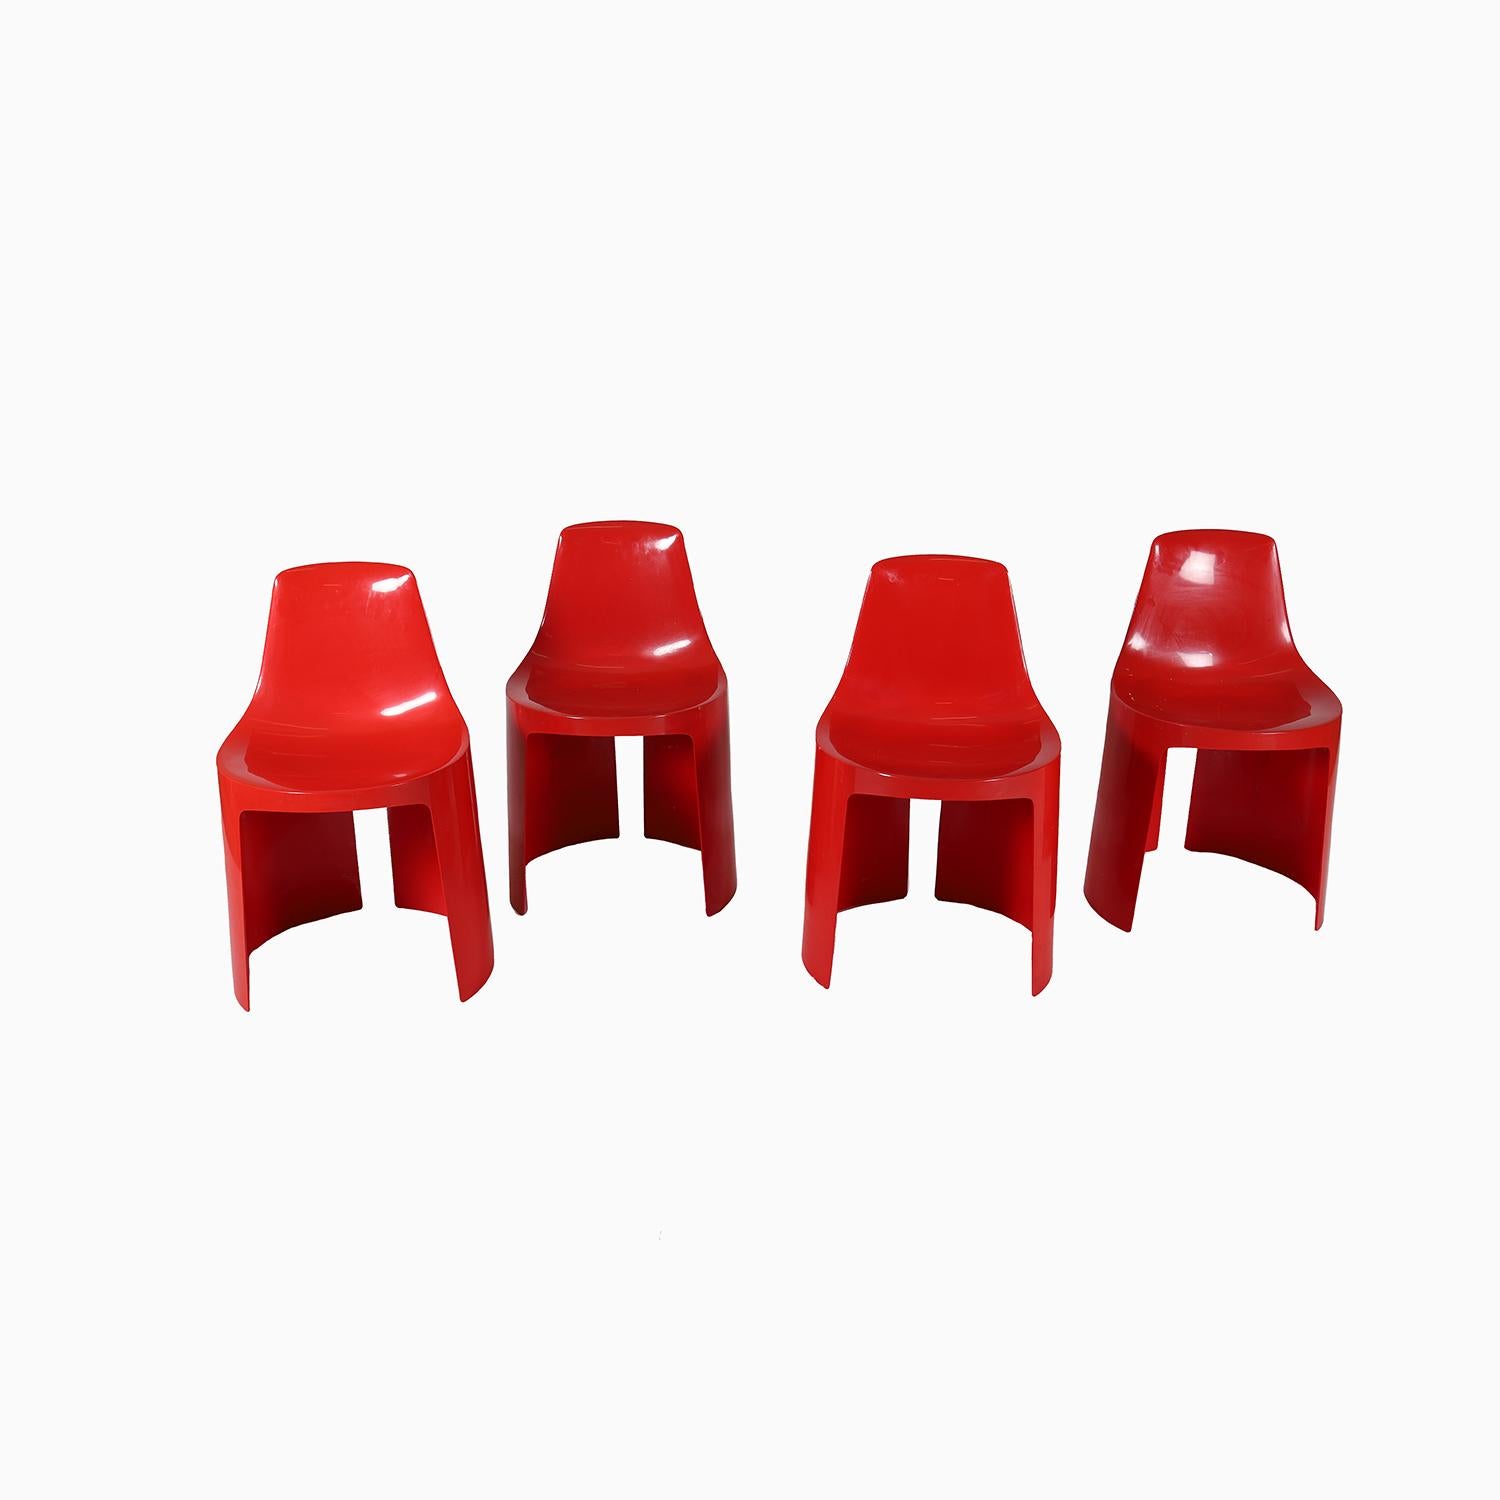 American  'Umbo' Red Molded Plastic Stacking Chair Set by Kay LeRoy Ruggles For Sale